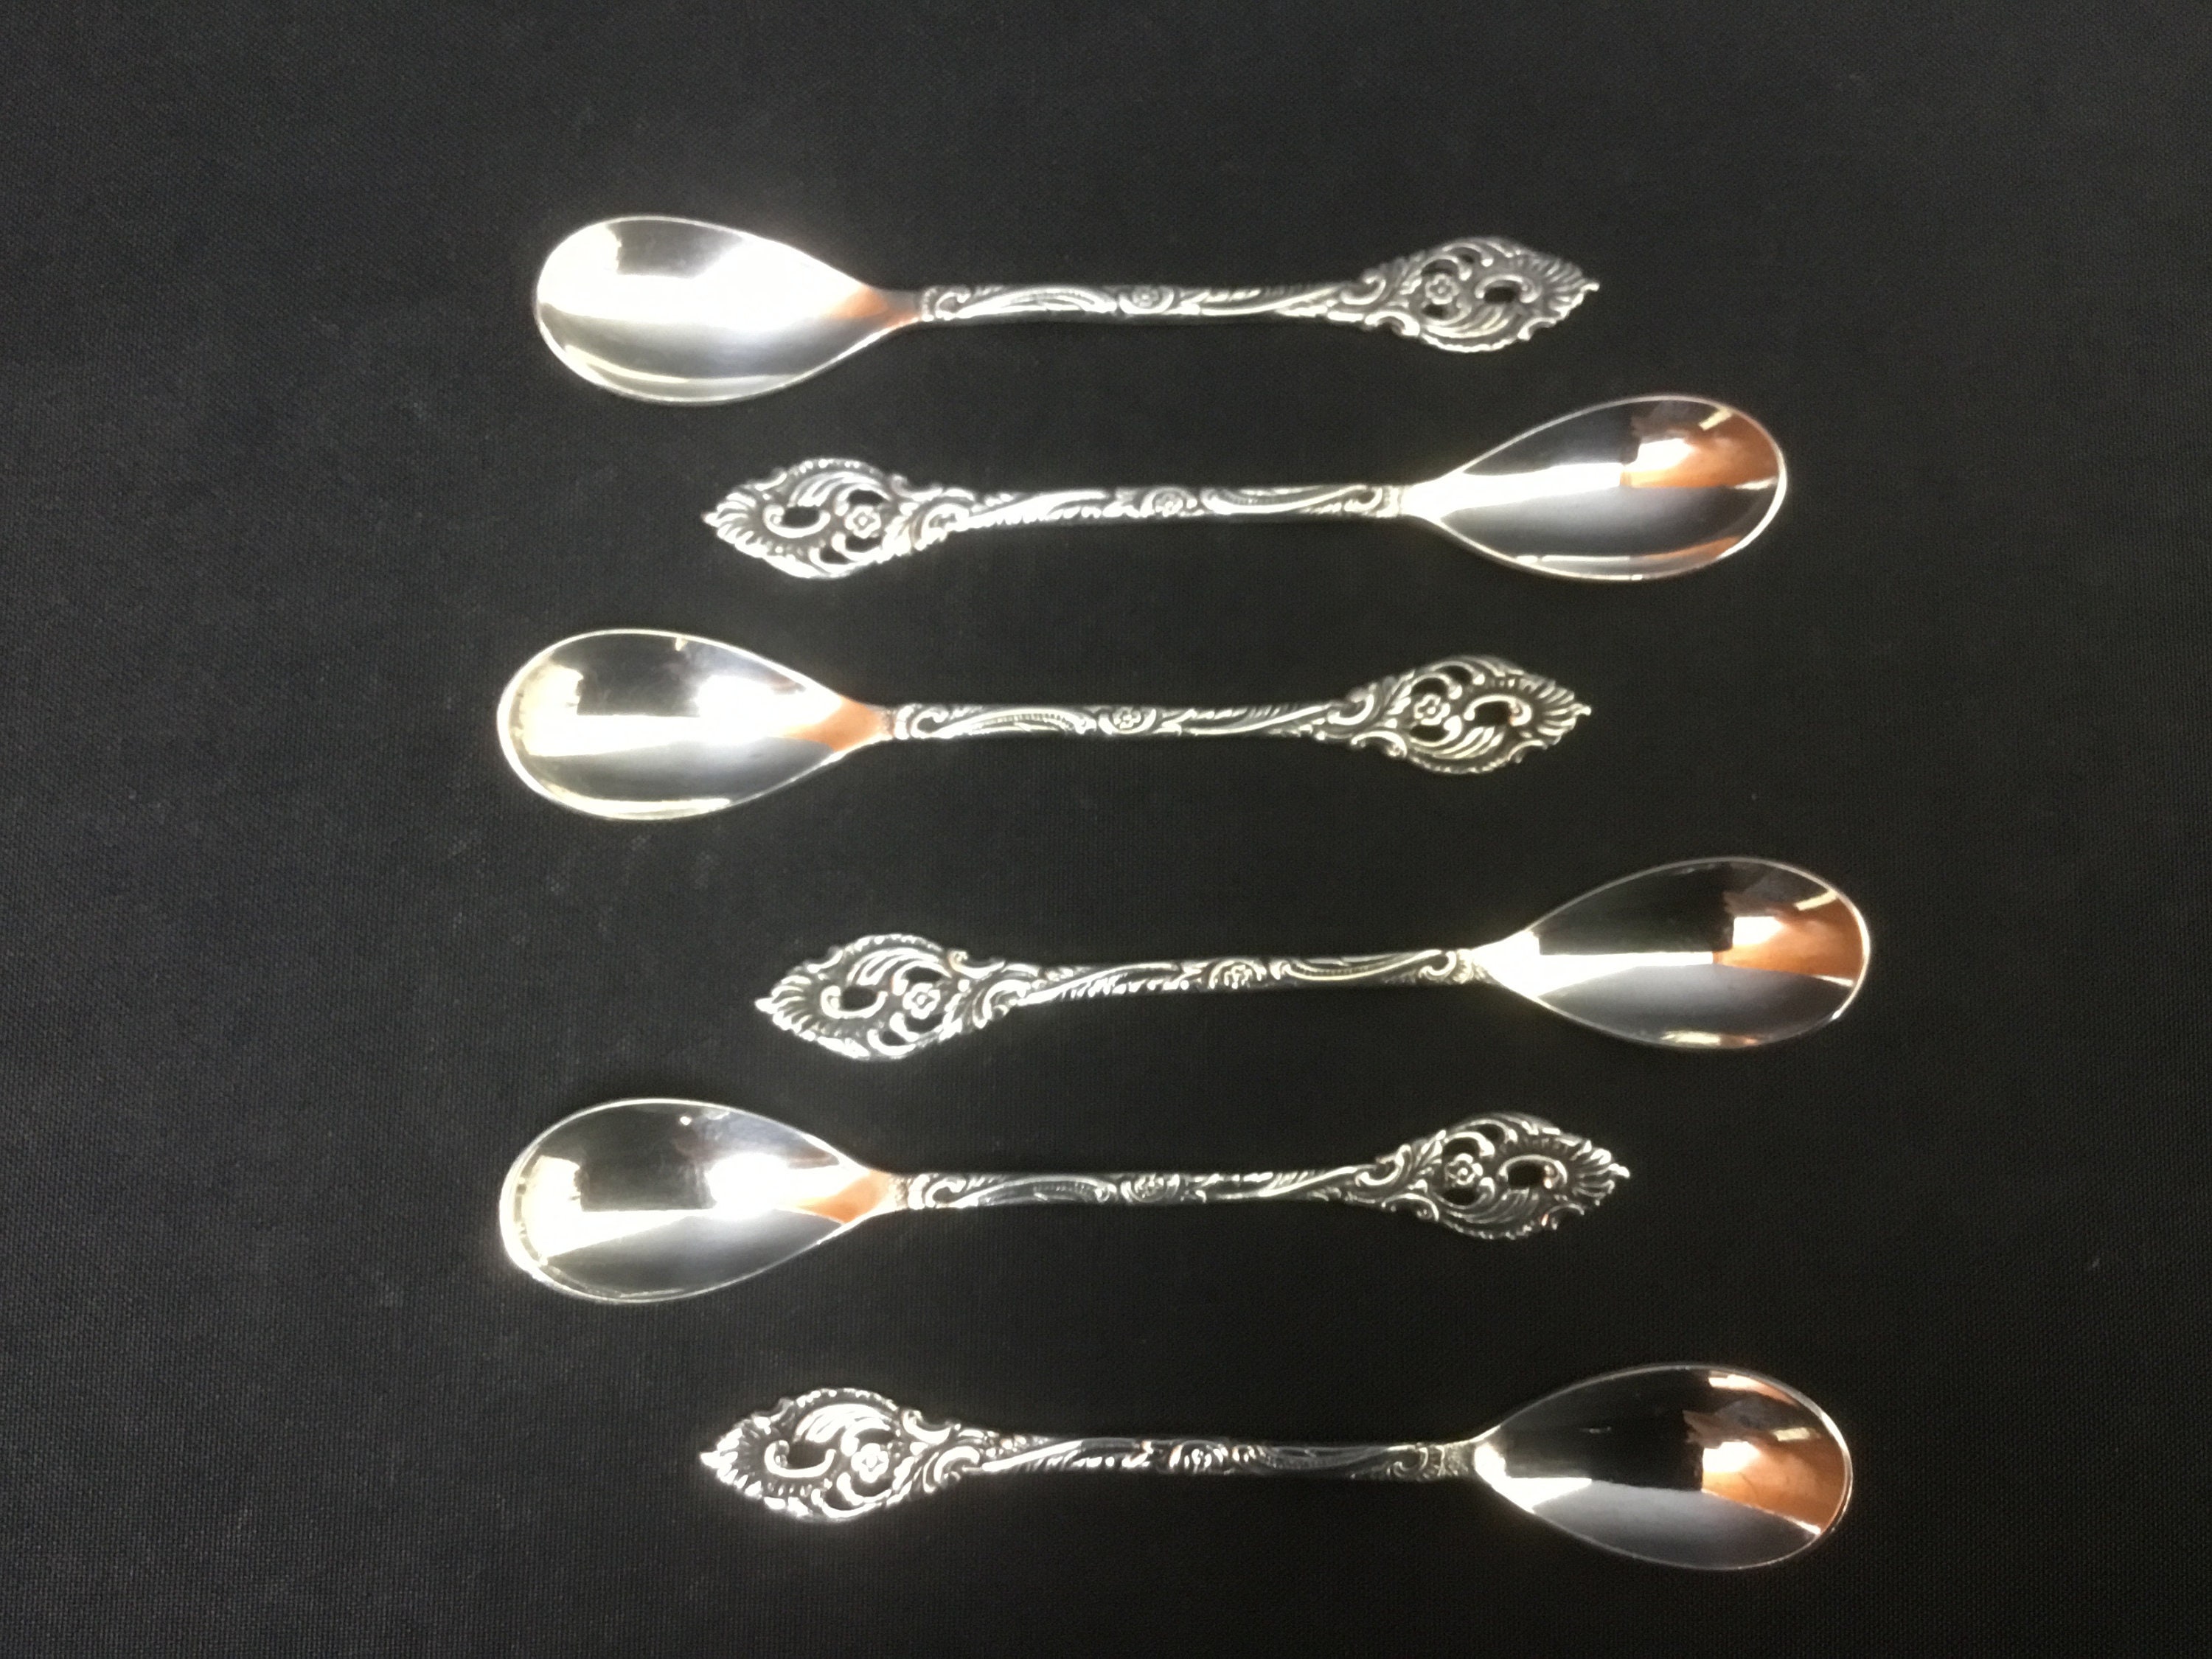 lied Brig kleding Egg Liqueur or Eggnog Spoons Set of 6 Small Spoons From the - Etsy